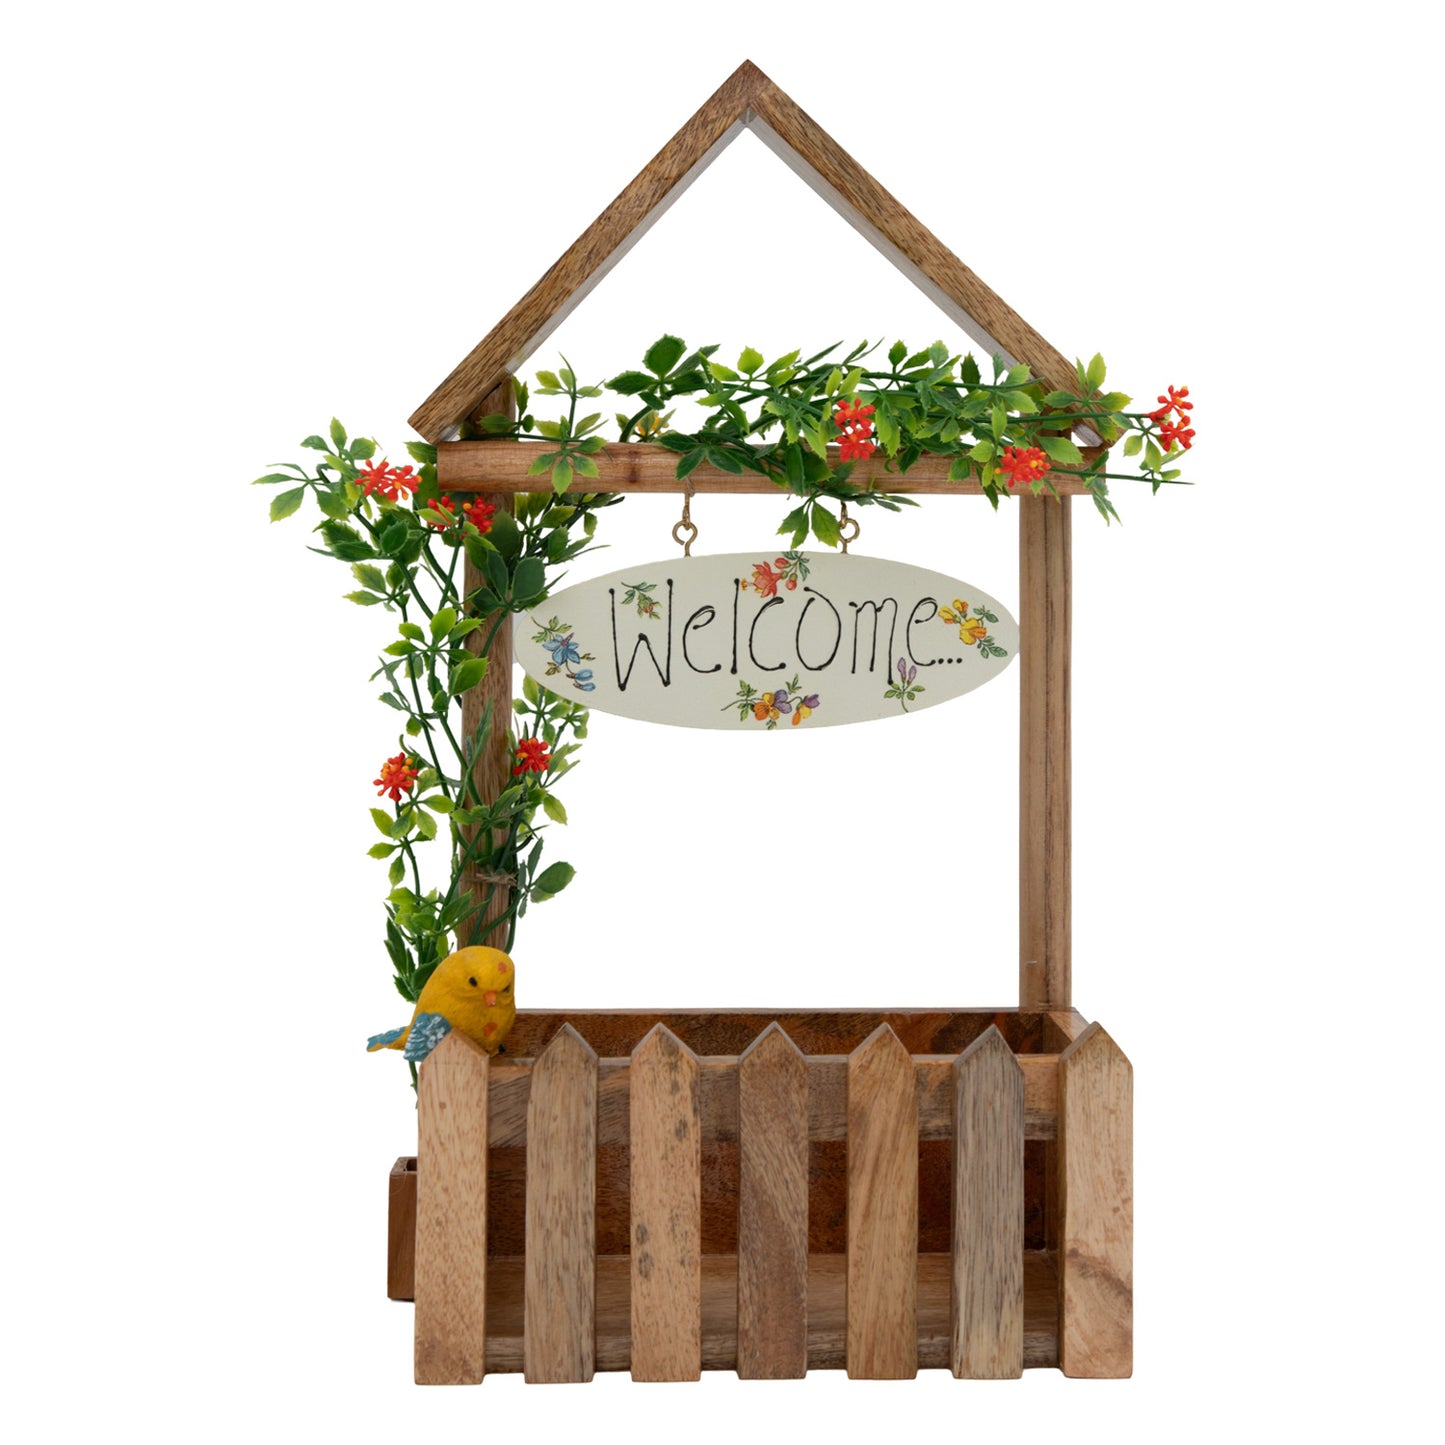 The Weaver's Nest Wooden Welcome Fence Planter